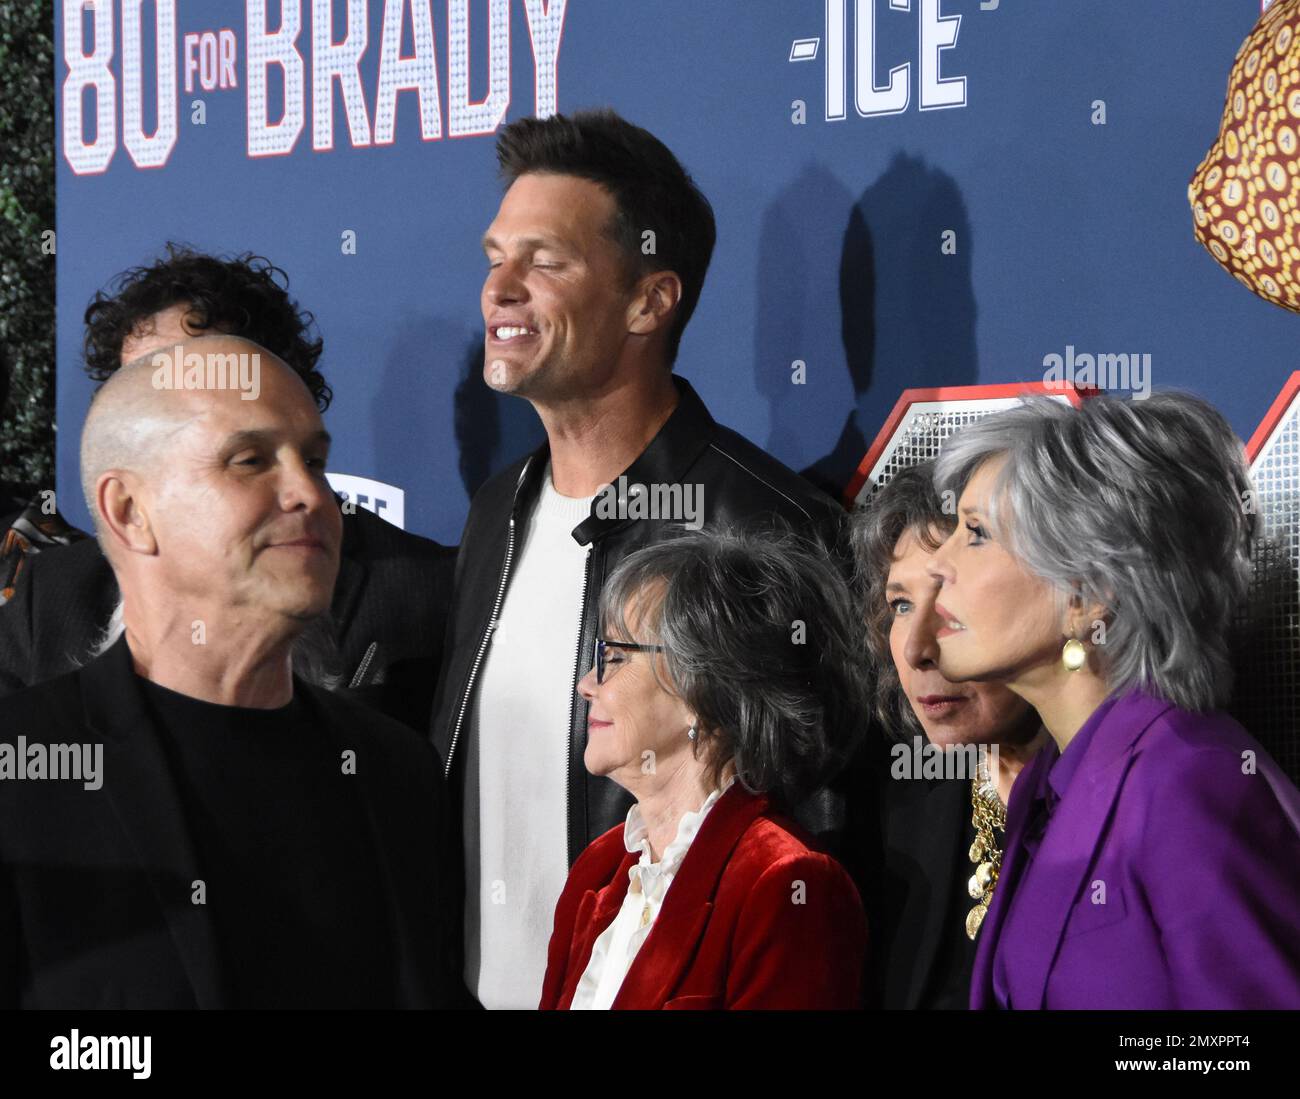 Los Angeles, California, USA 31st January 2023 (L-R) Brian Robbins, Director Kyle Marvin, Actress Rita Morena, Football Player Tom Brady, Actress Sally Field, Actress Lily Tomlin and Actress Jane Fonda attend the Los Angeles Premiere Screening of Paramount Pictures' '80 for Brady' at Regency Village Theatre on January 31, 2023 in Los Angeles, California, USA. Photo by Barry King/Alamy Stock Photo Stock Photo